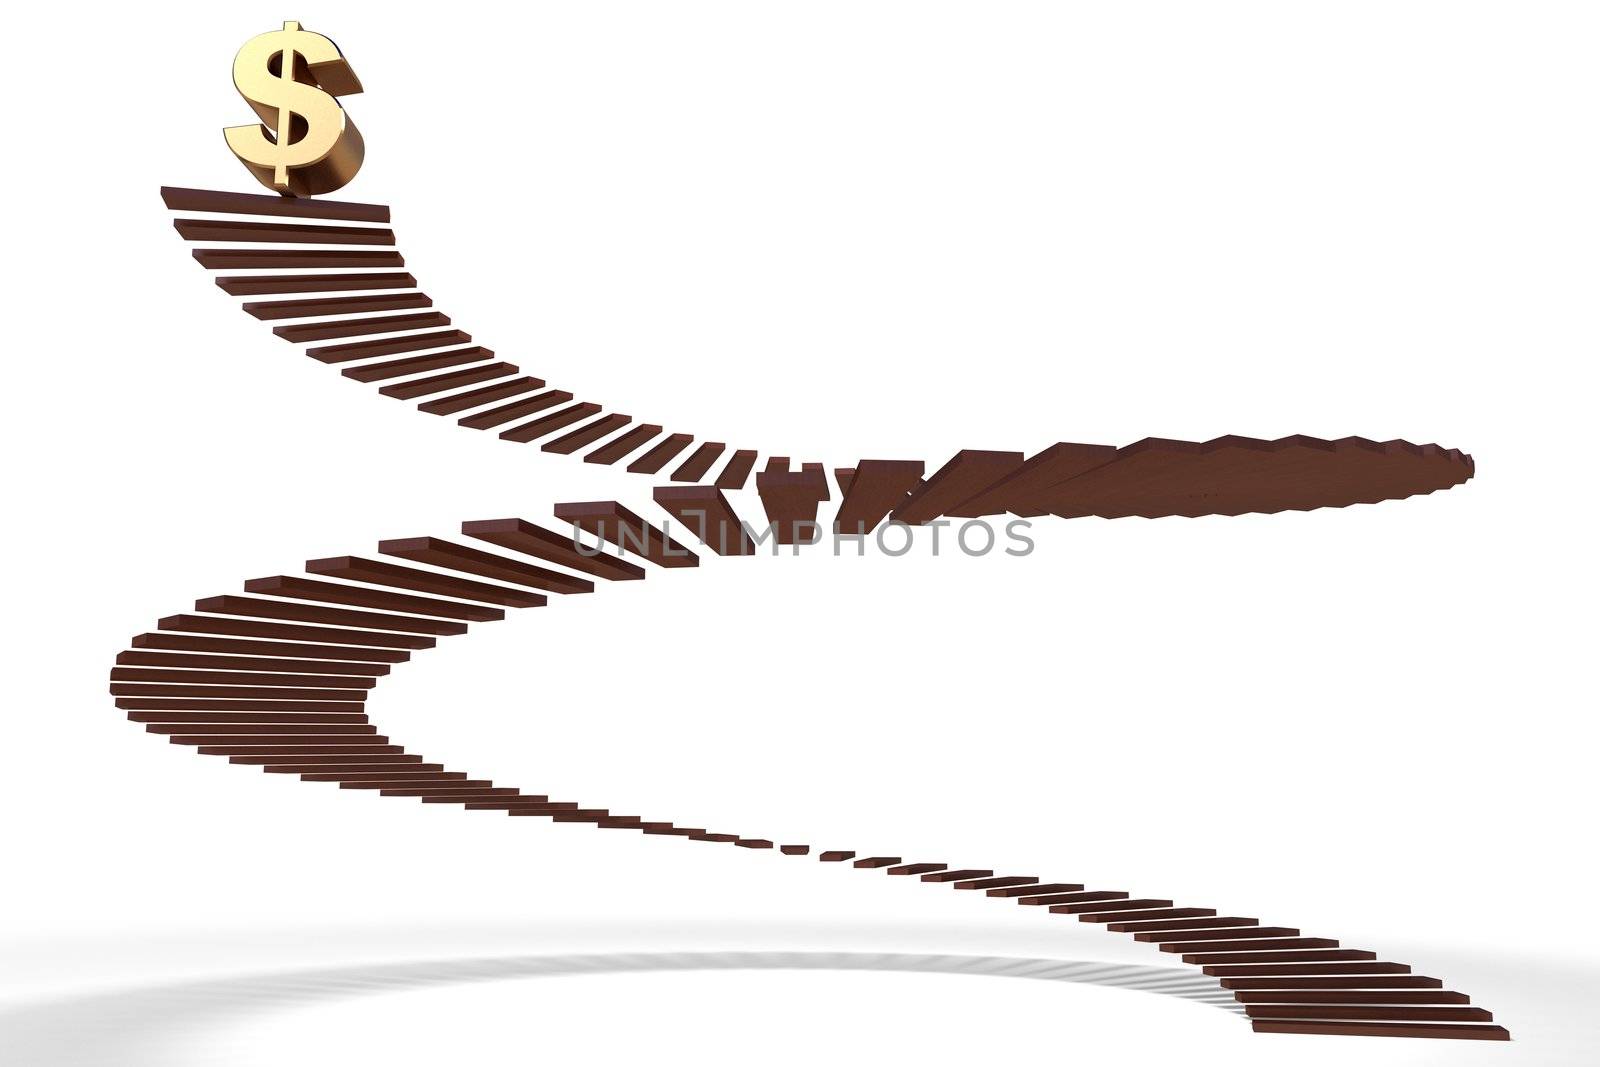 Golden dollar symbol on the top of the stairs isolated on white 3d render
